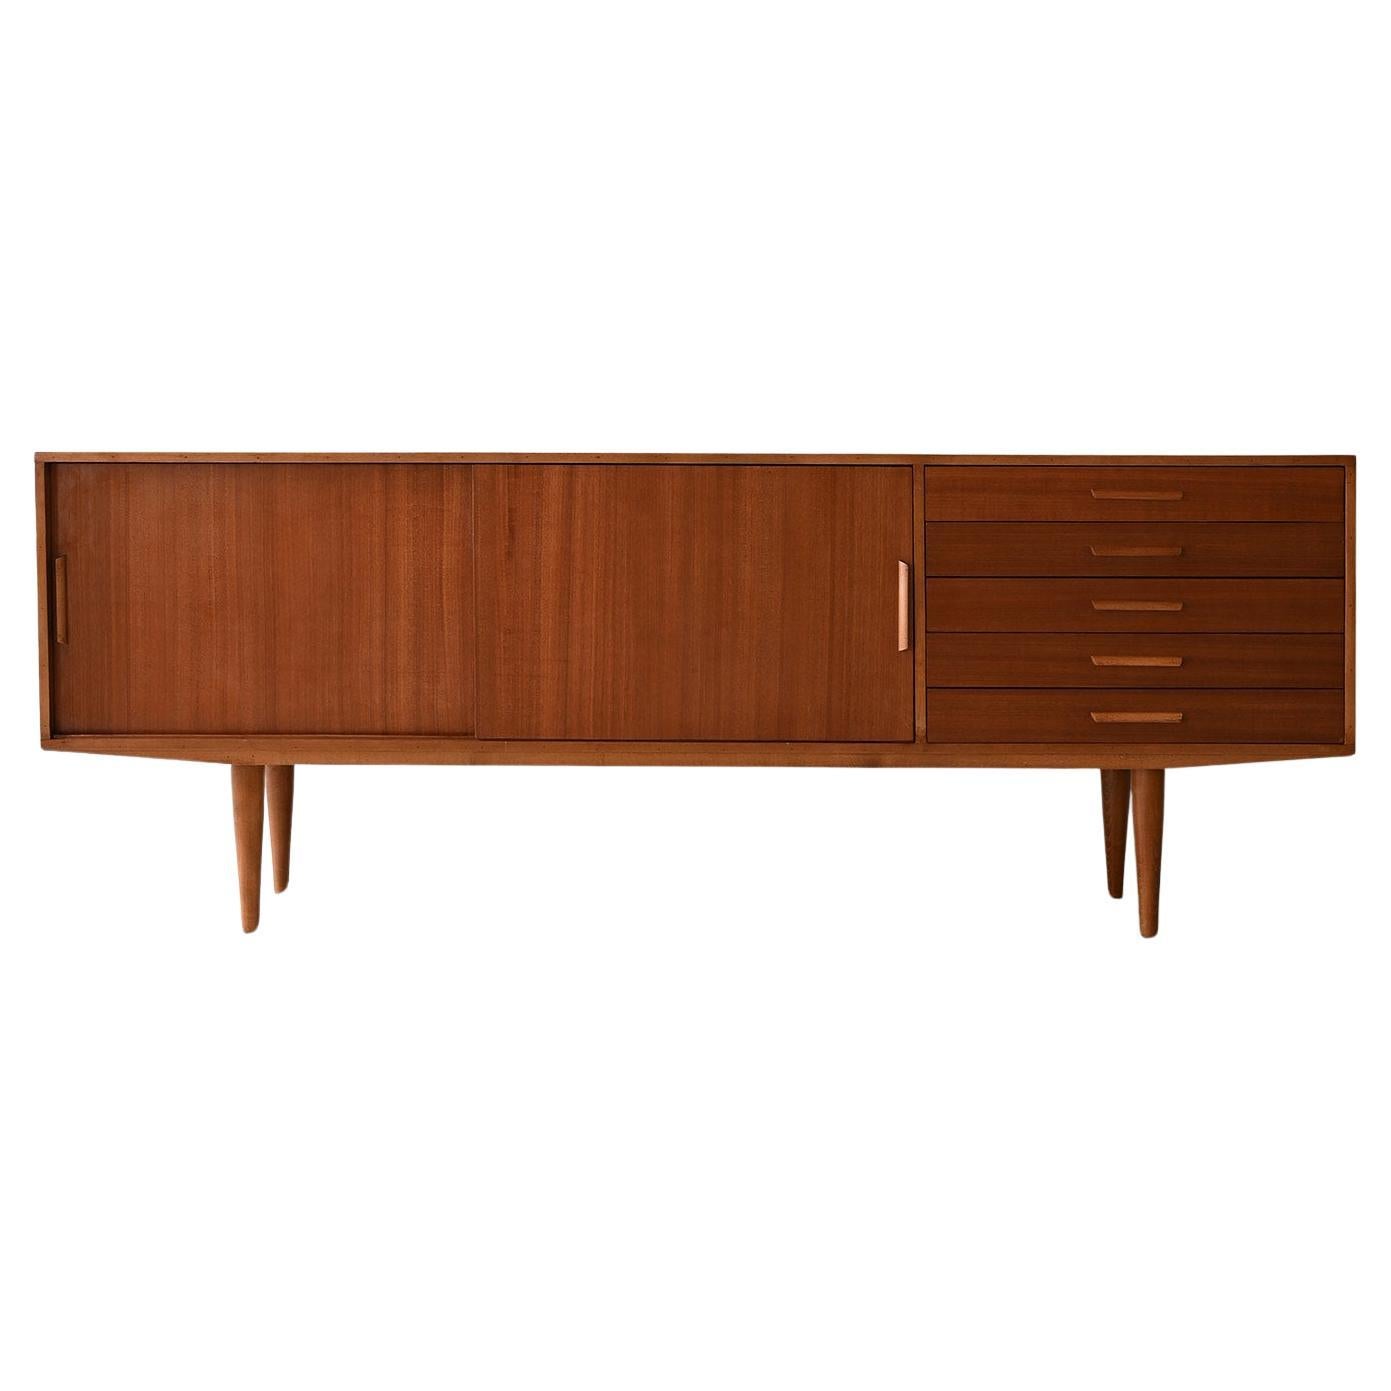 Sideboard danese anni '60 For Sale